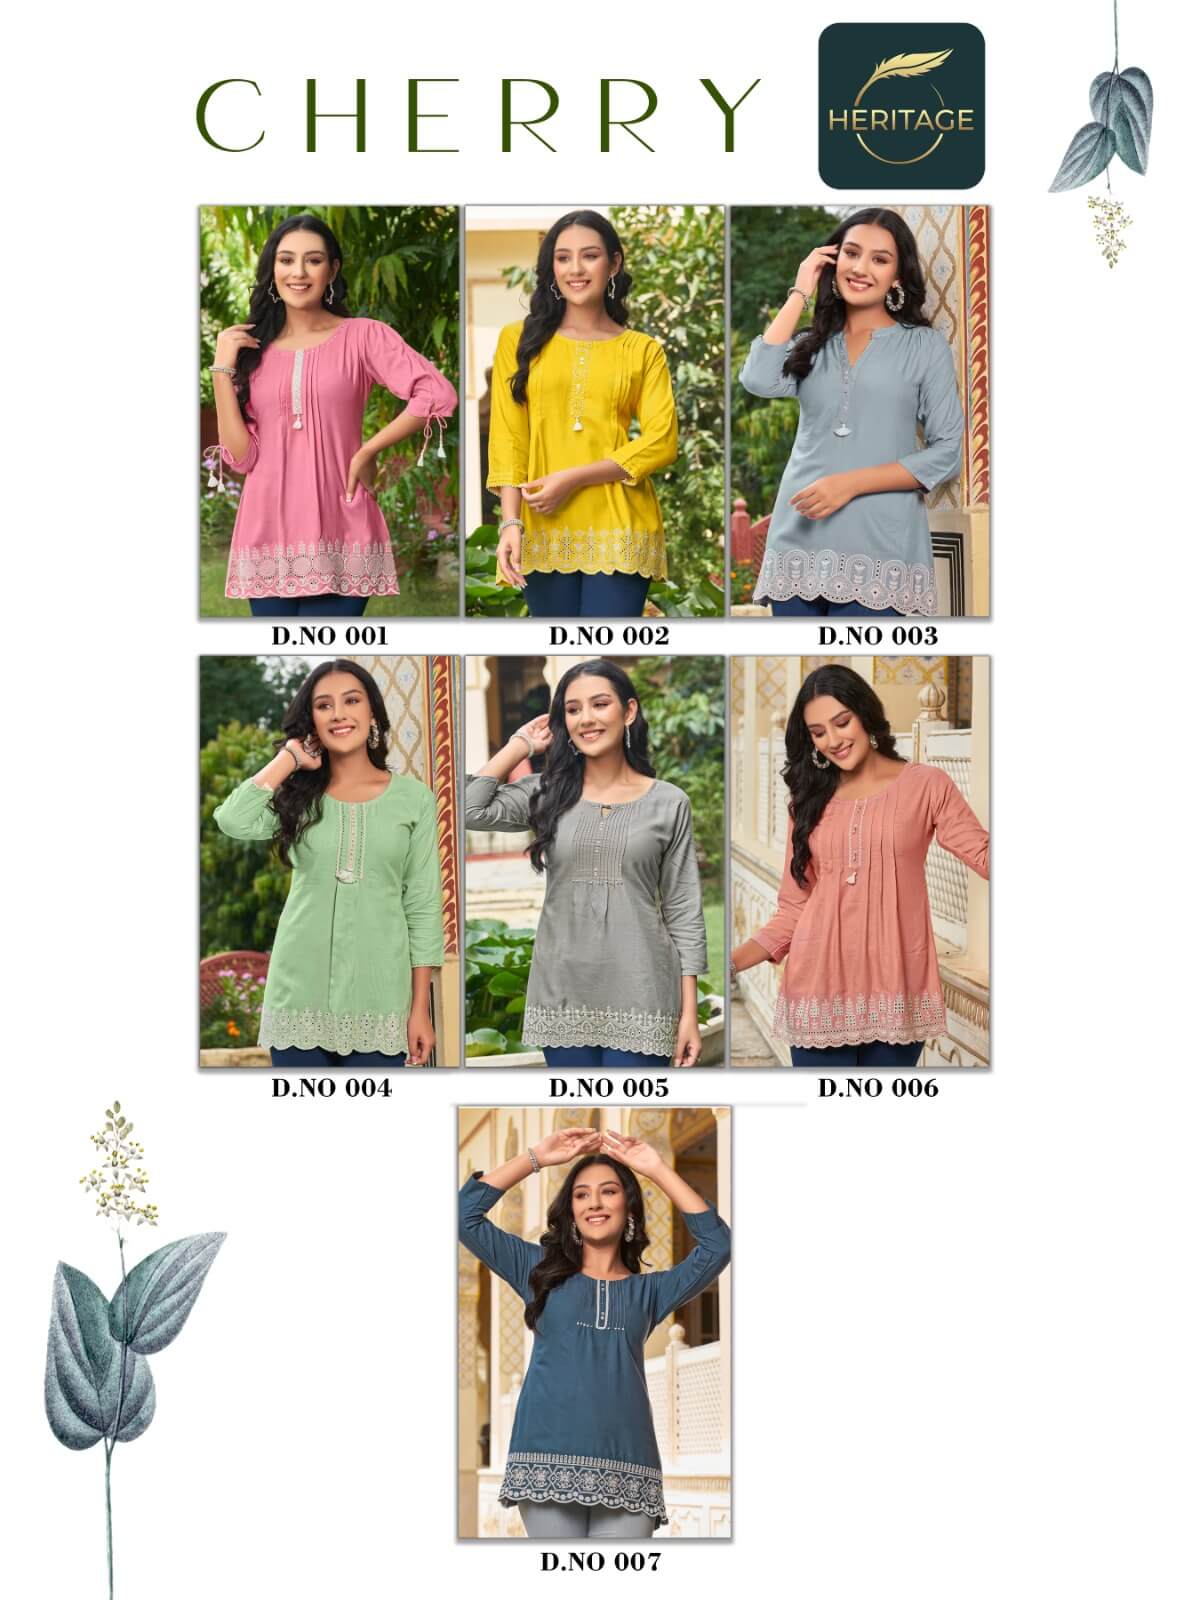 Heritage Cherry Rayon Ladies Tops Catalog collection 3